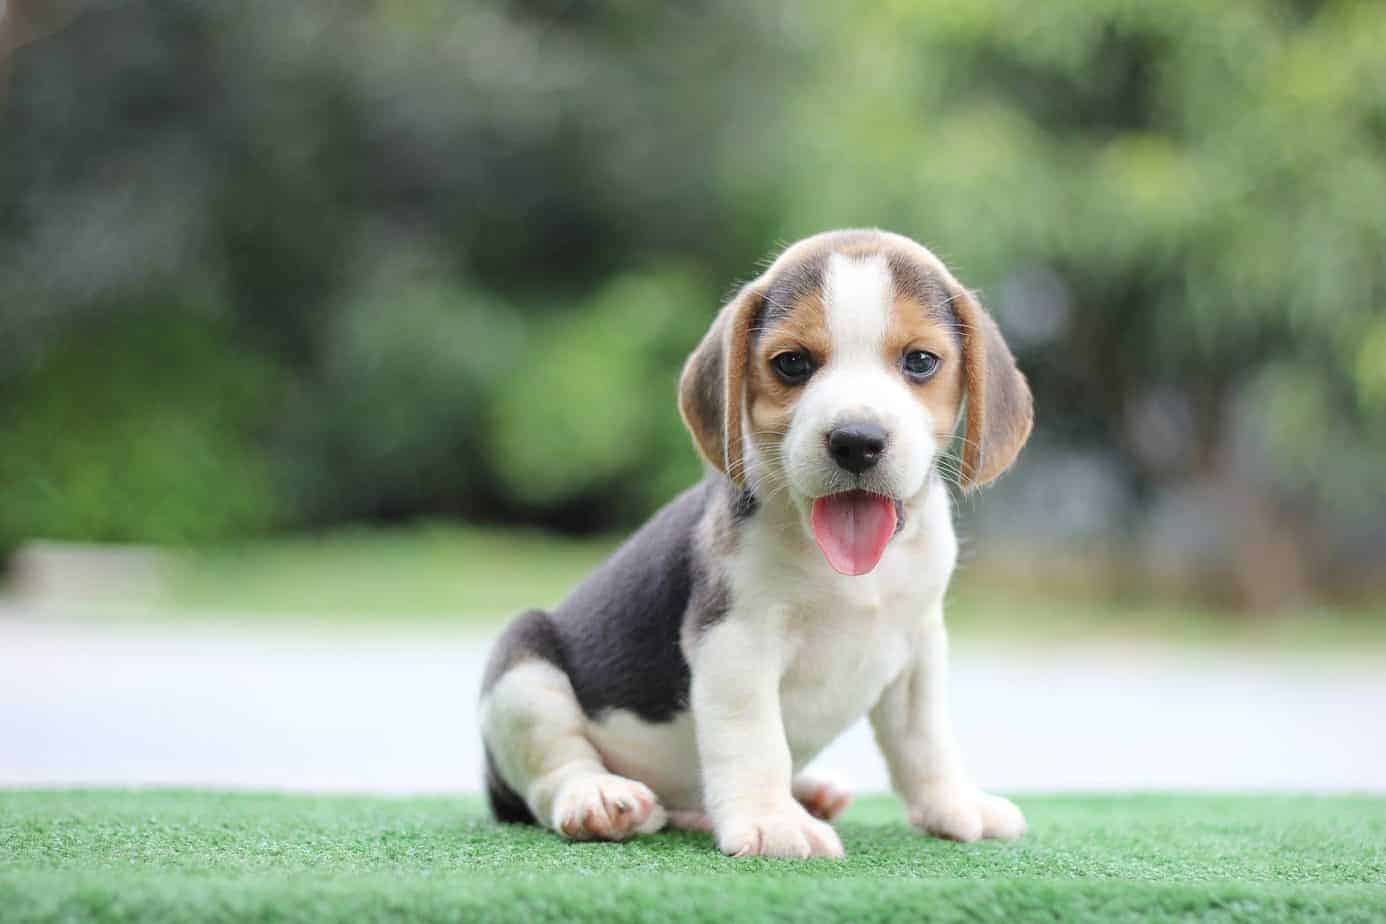 Beagle Dogs - What's Good and Bad About 'Em - Puppies Club